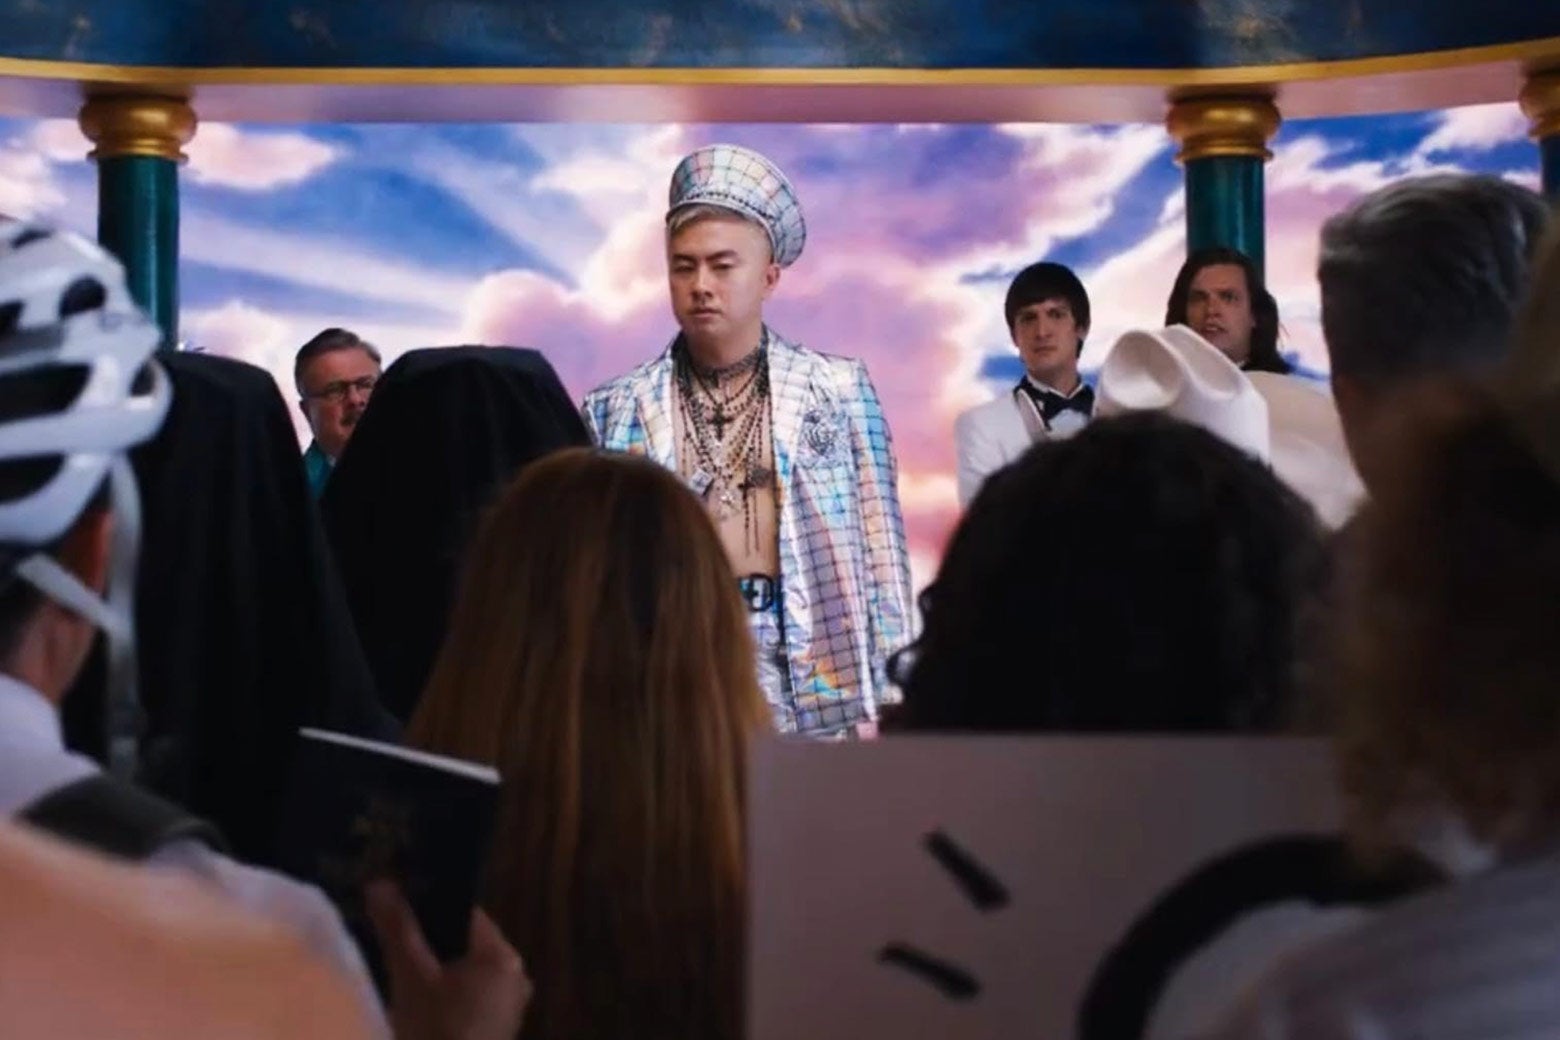 In the center, Bowen Yang wears a suit that looks like shiny graph paper, several gold necklaces, and a shiny-graph-paper hat, against a background of marble columns and pastel clouds. He appears to be addressing a crowd, and behind him on each side, the other actors look on.